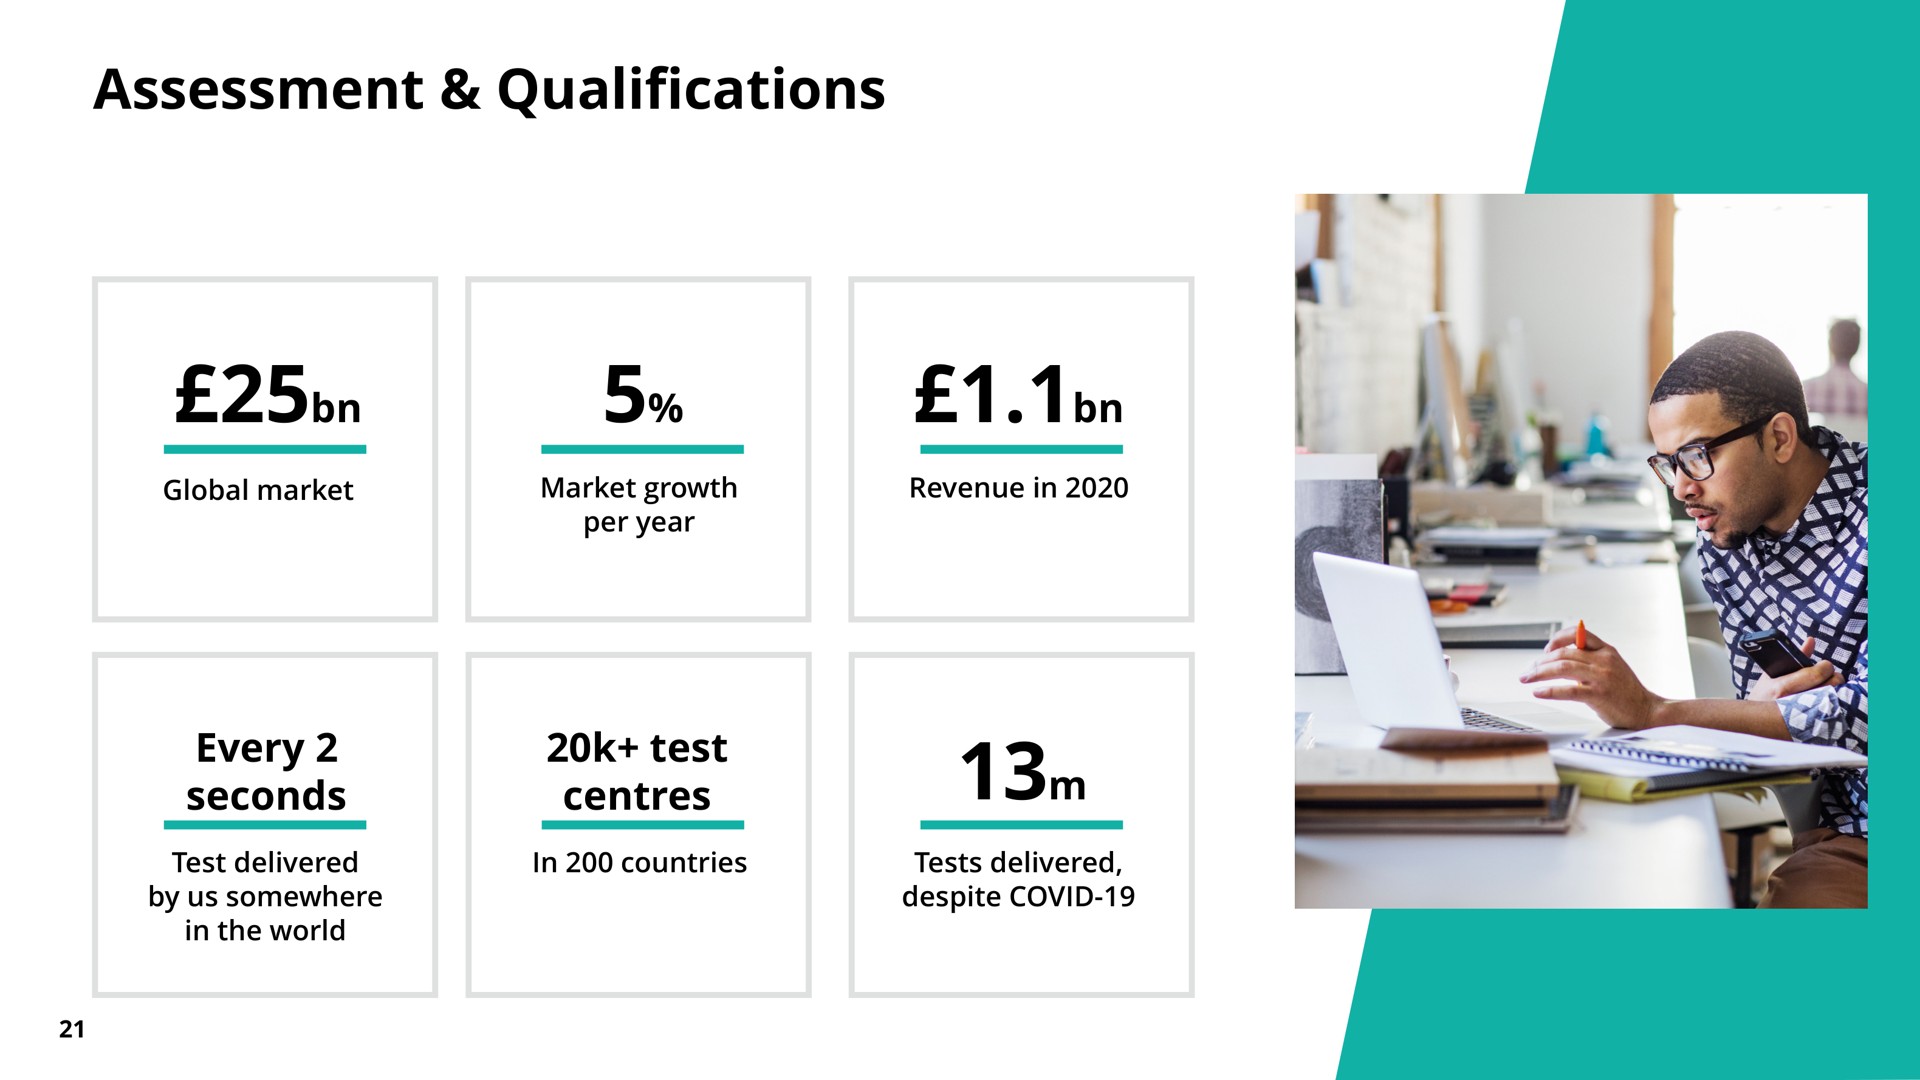 assessment qualifications | Pearson